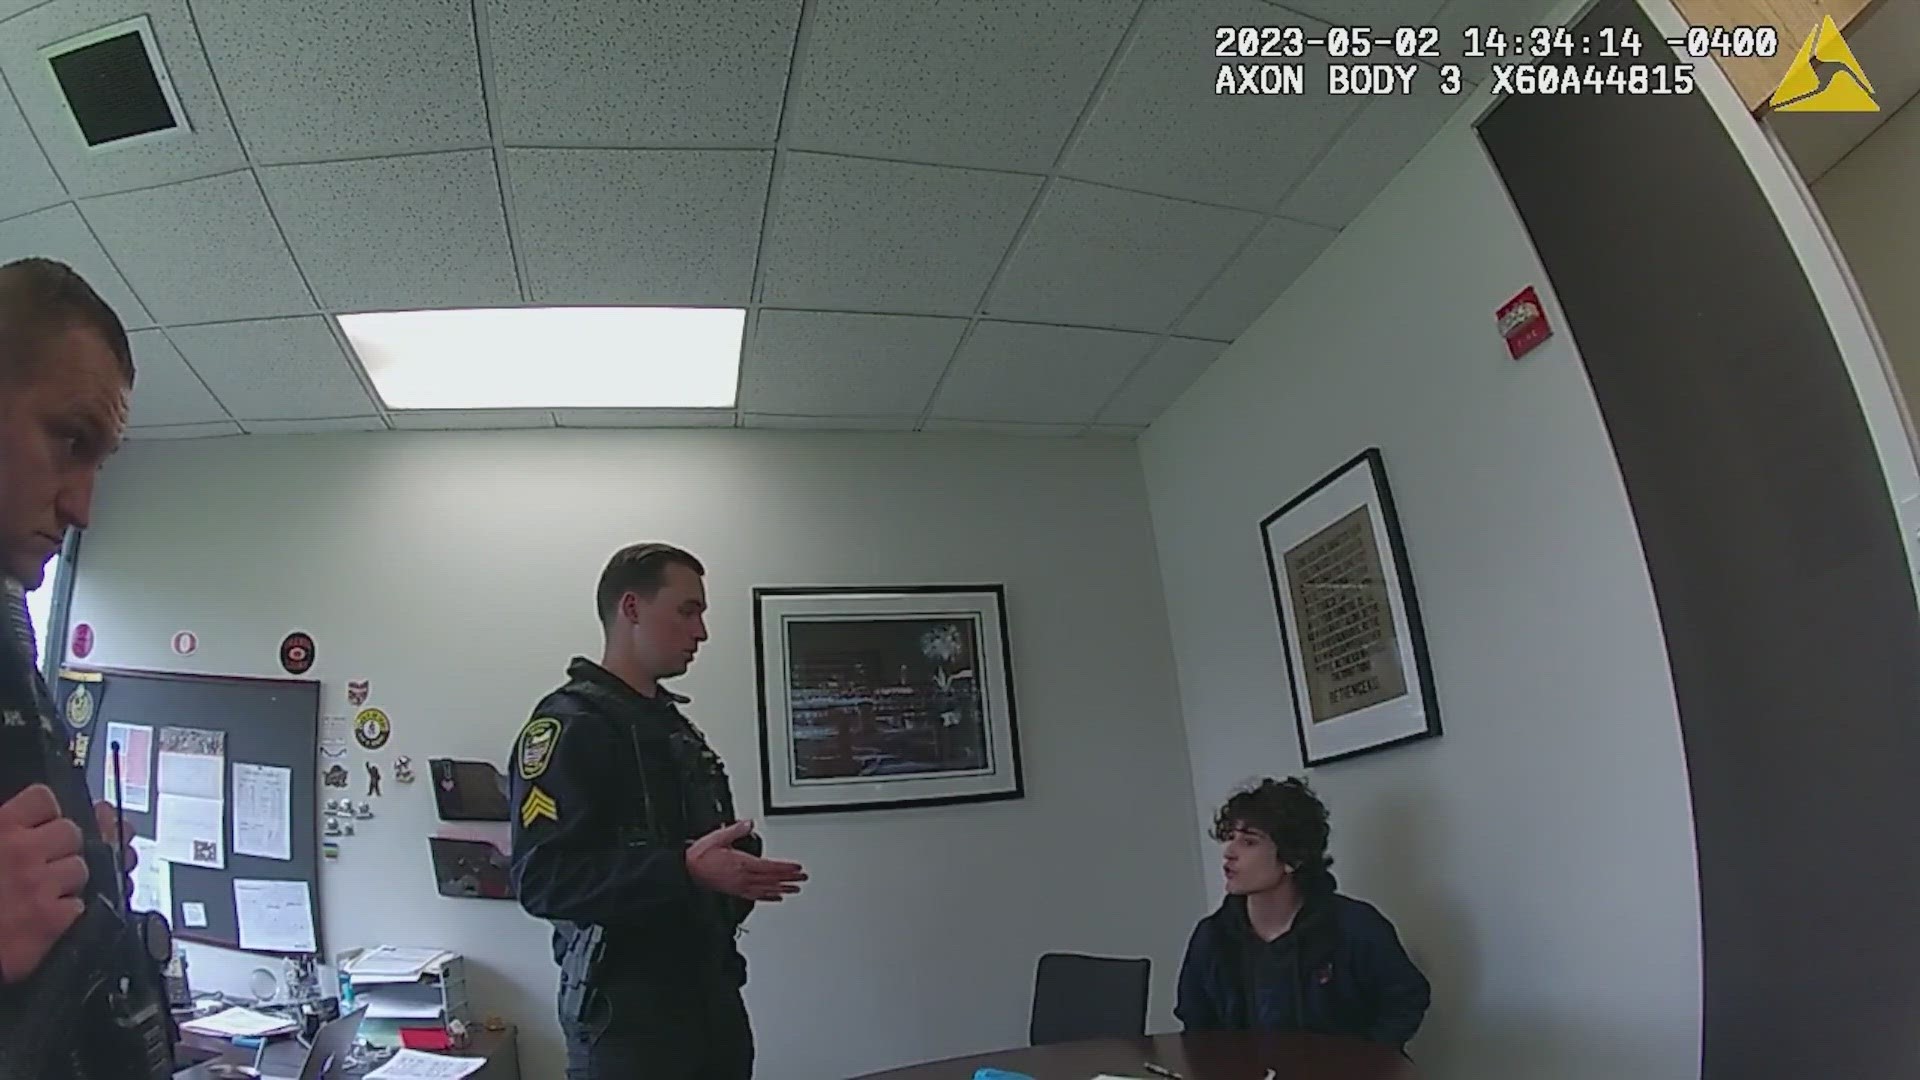 Bodycam video released by Pepper Pike police shows 18-year-old Nolan Rosen admitting to bringing a bullet in the building.